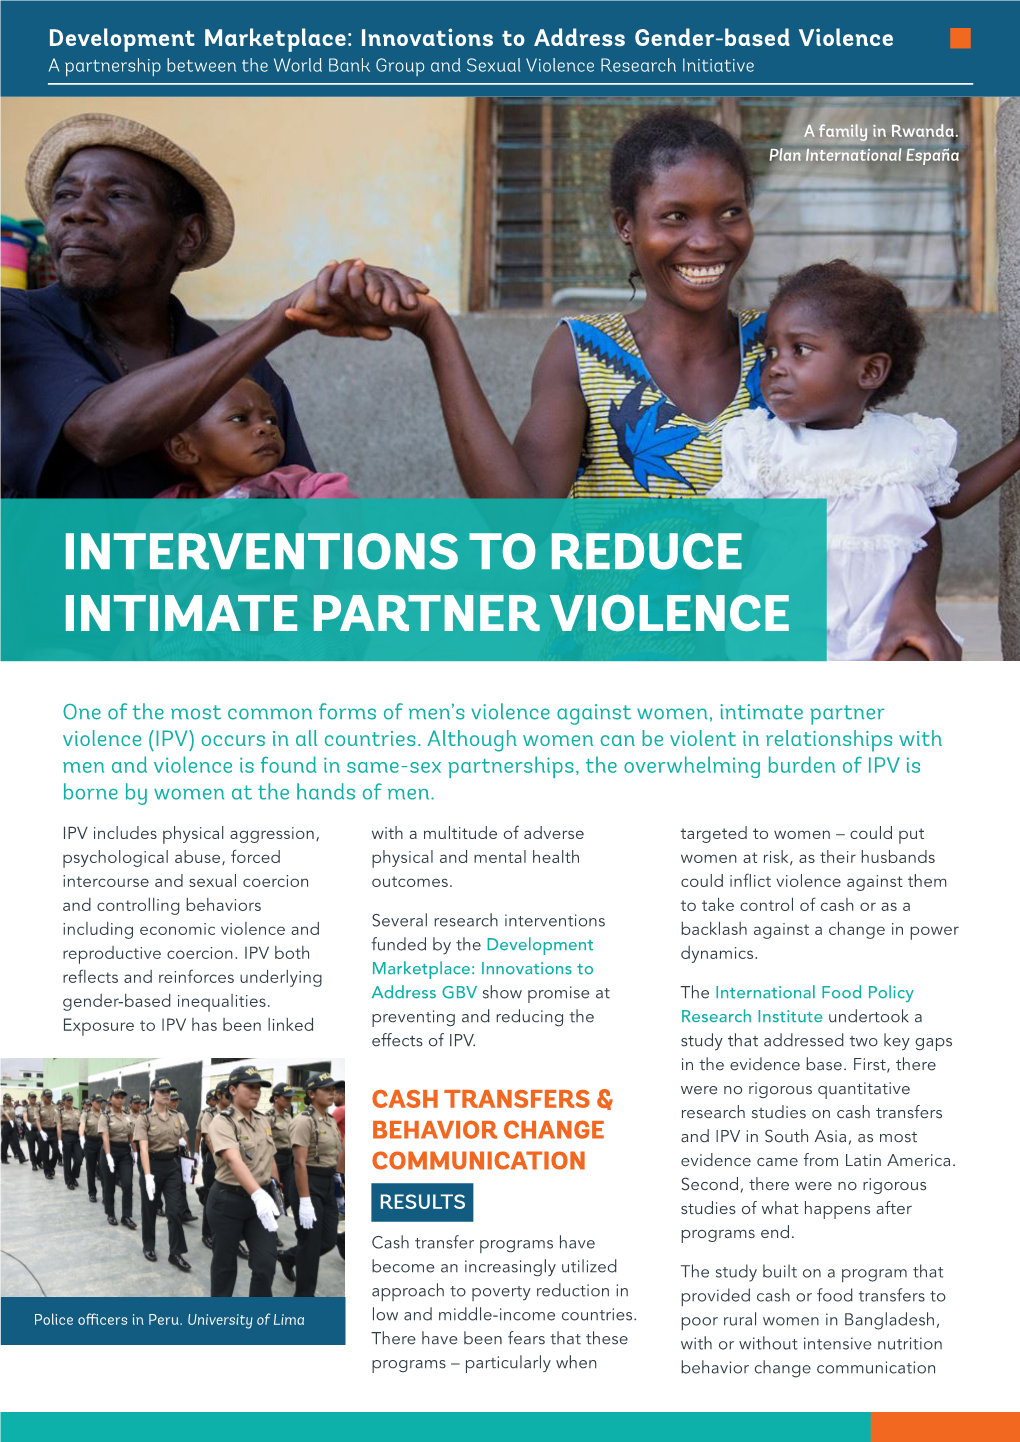 Interventions to Reduce Intimate Partner Violence